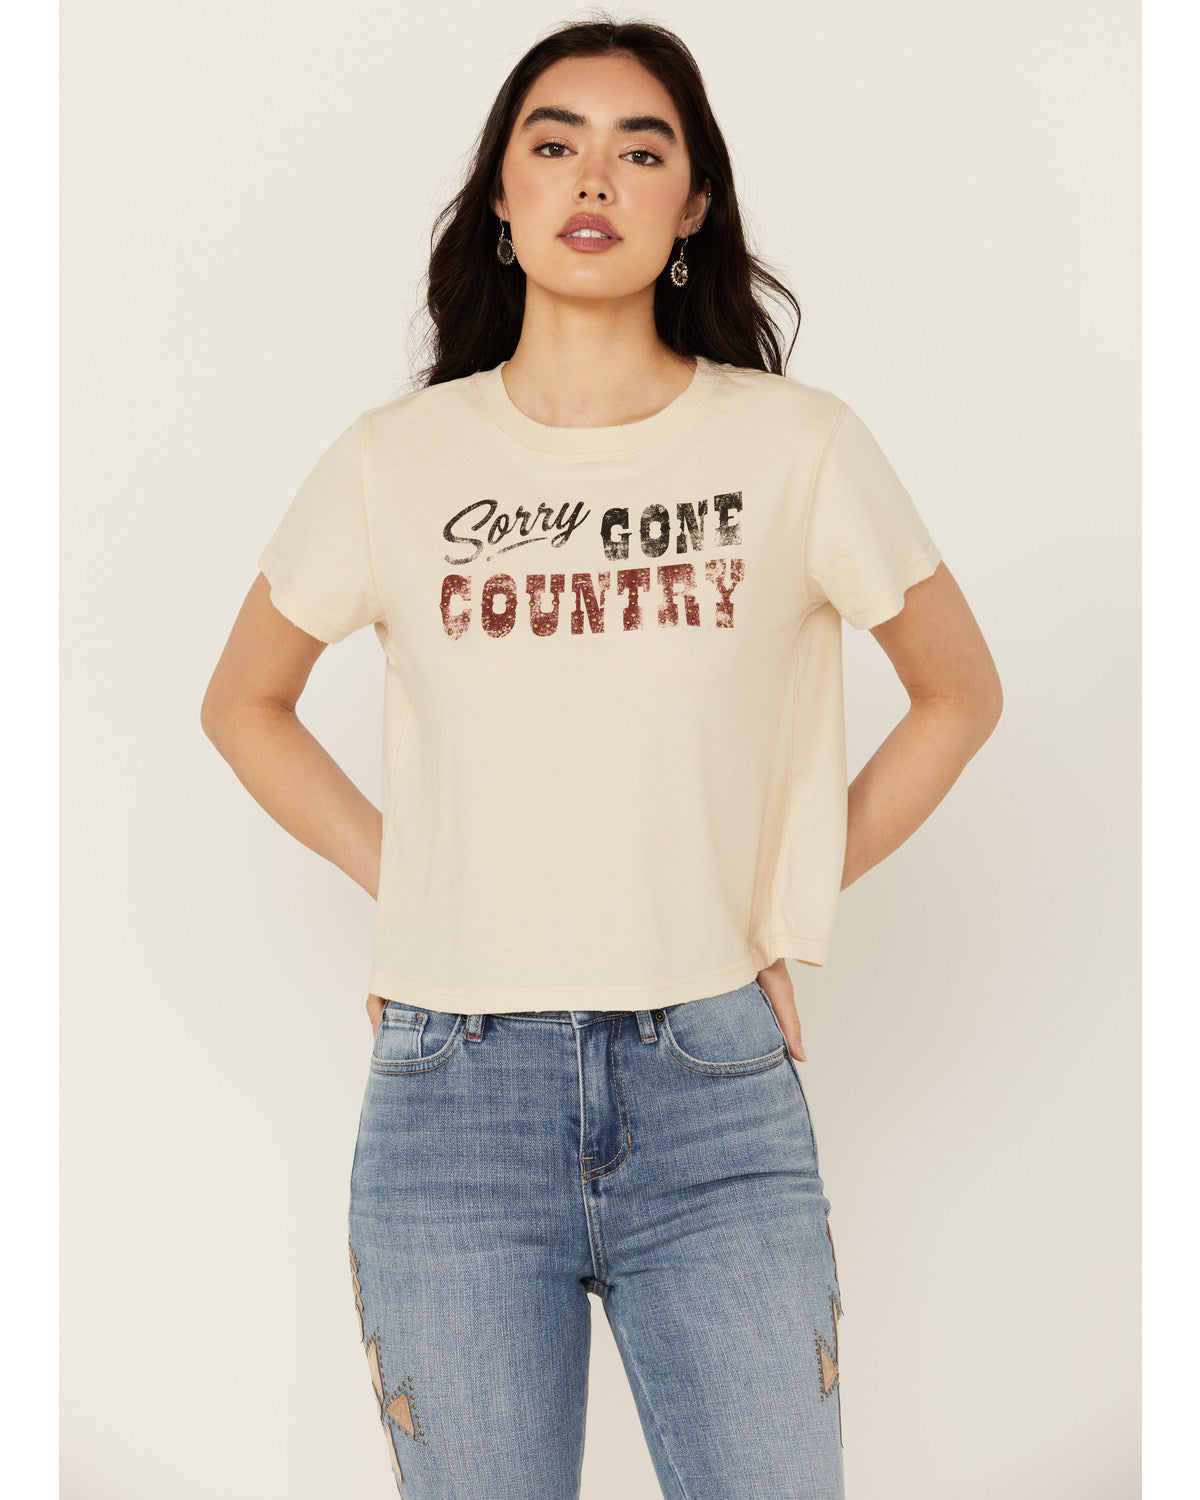 Sorry Gone Country Short Sleeve Cropped Graphic Tee